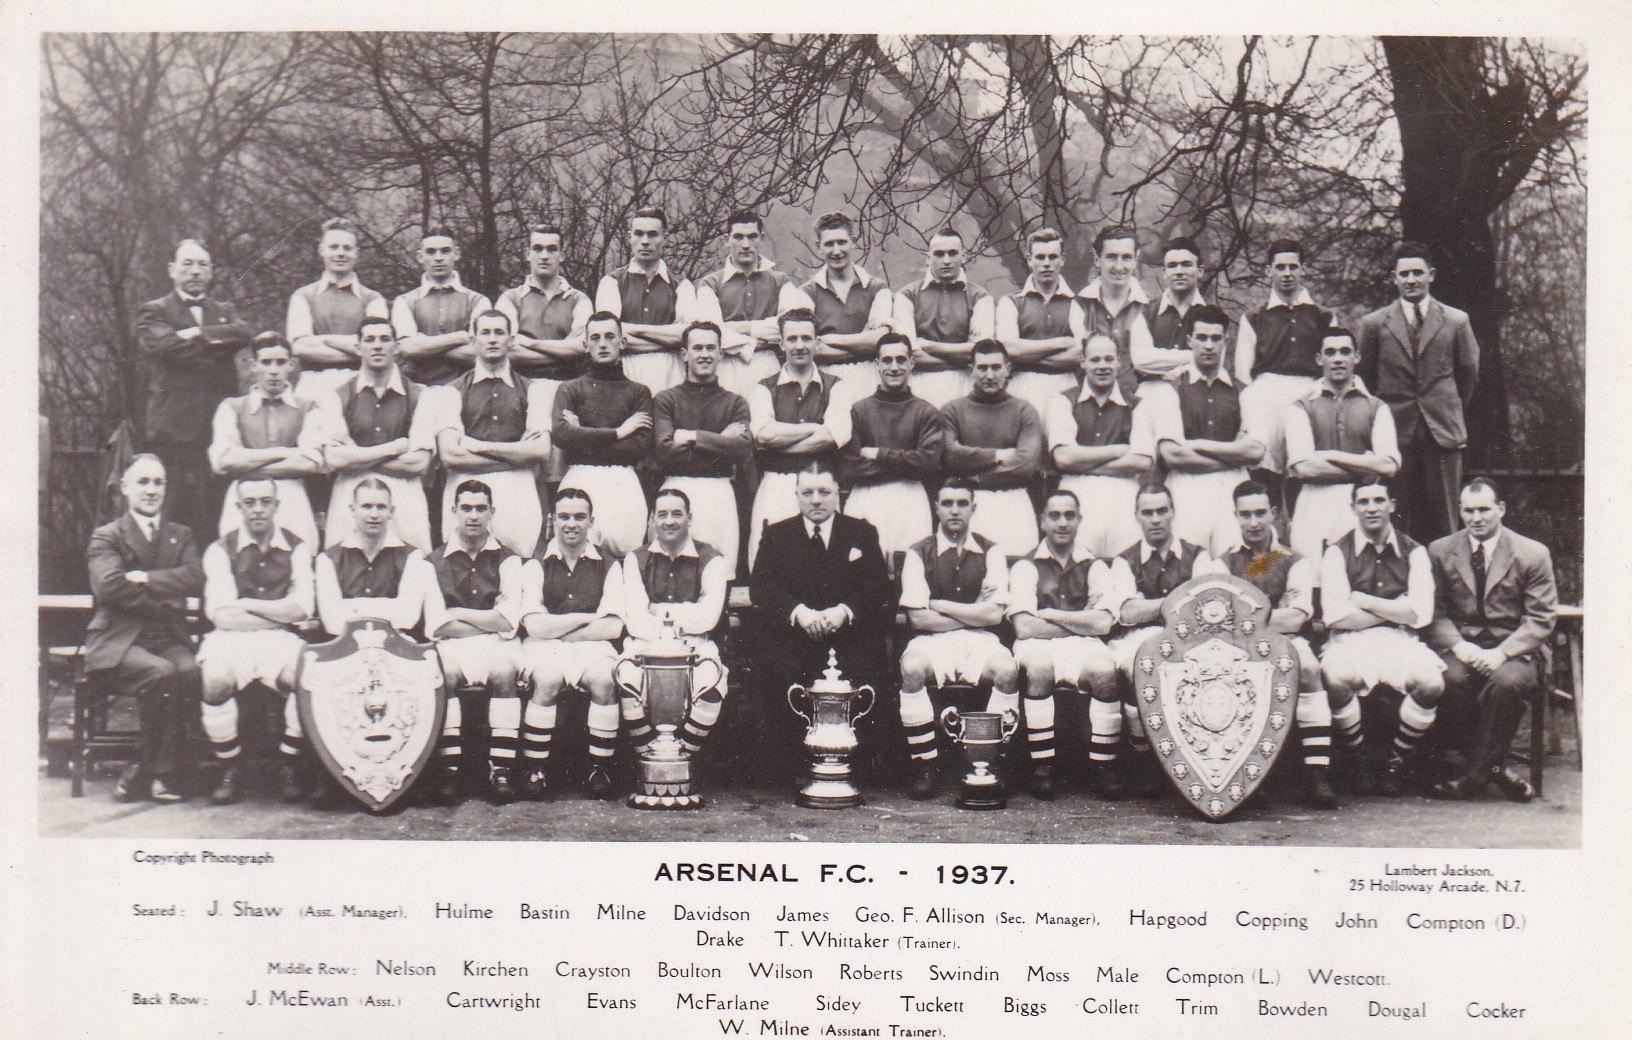 ARSENAL Scarce postcard issued by official Arsenal photographers Lambert Jackson, team group 1937